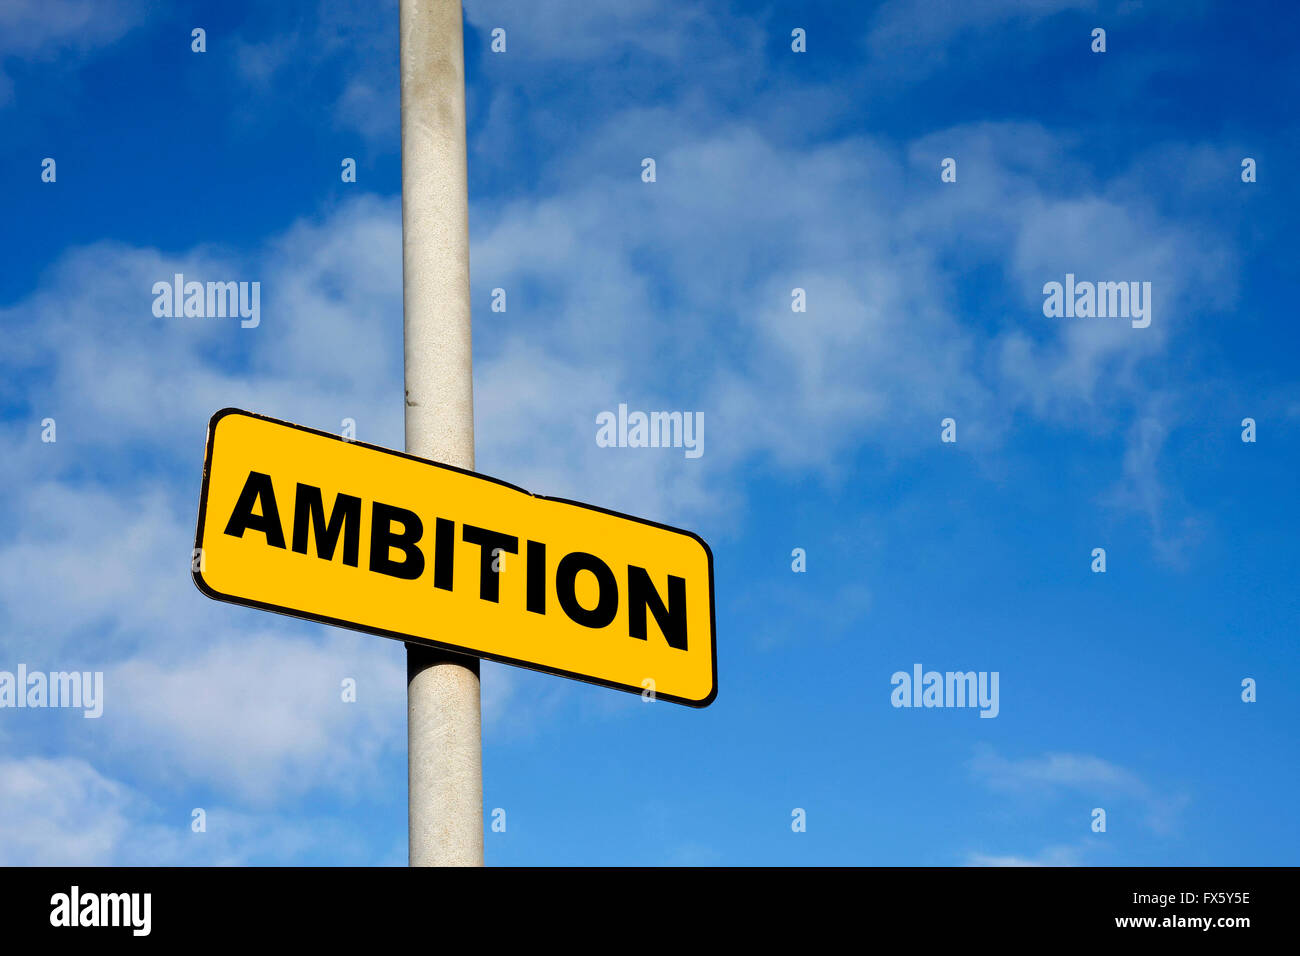 Yellow Ambition sign against a blue sky Stock Photo